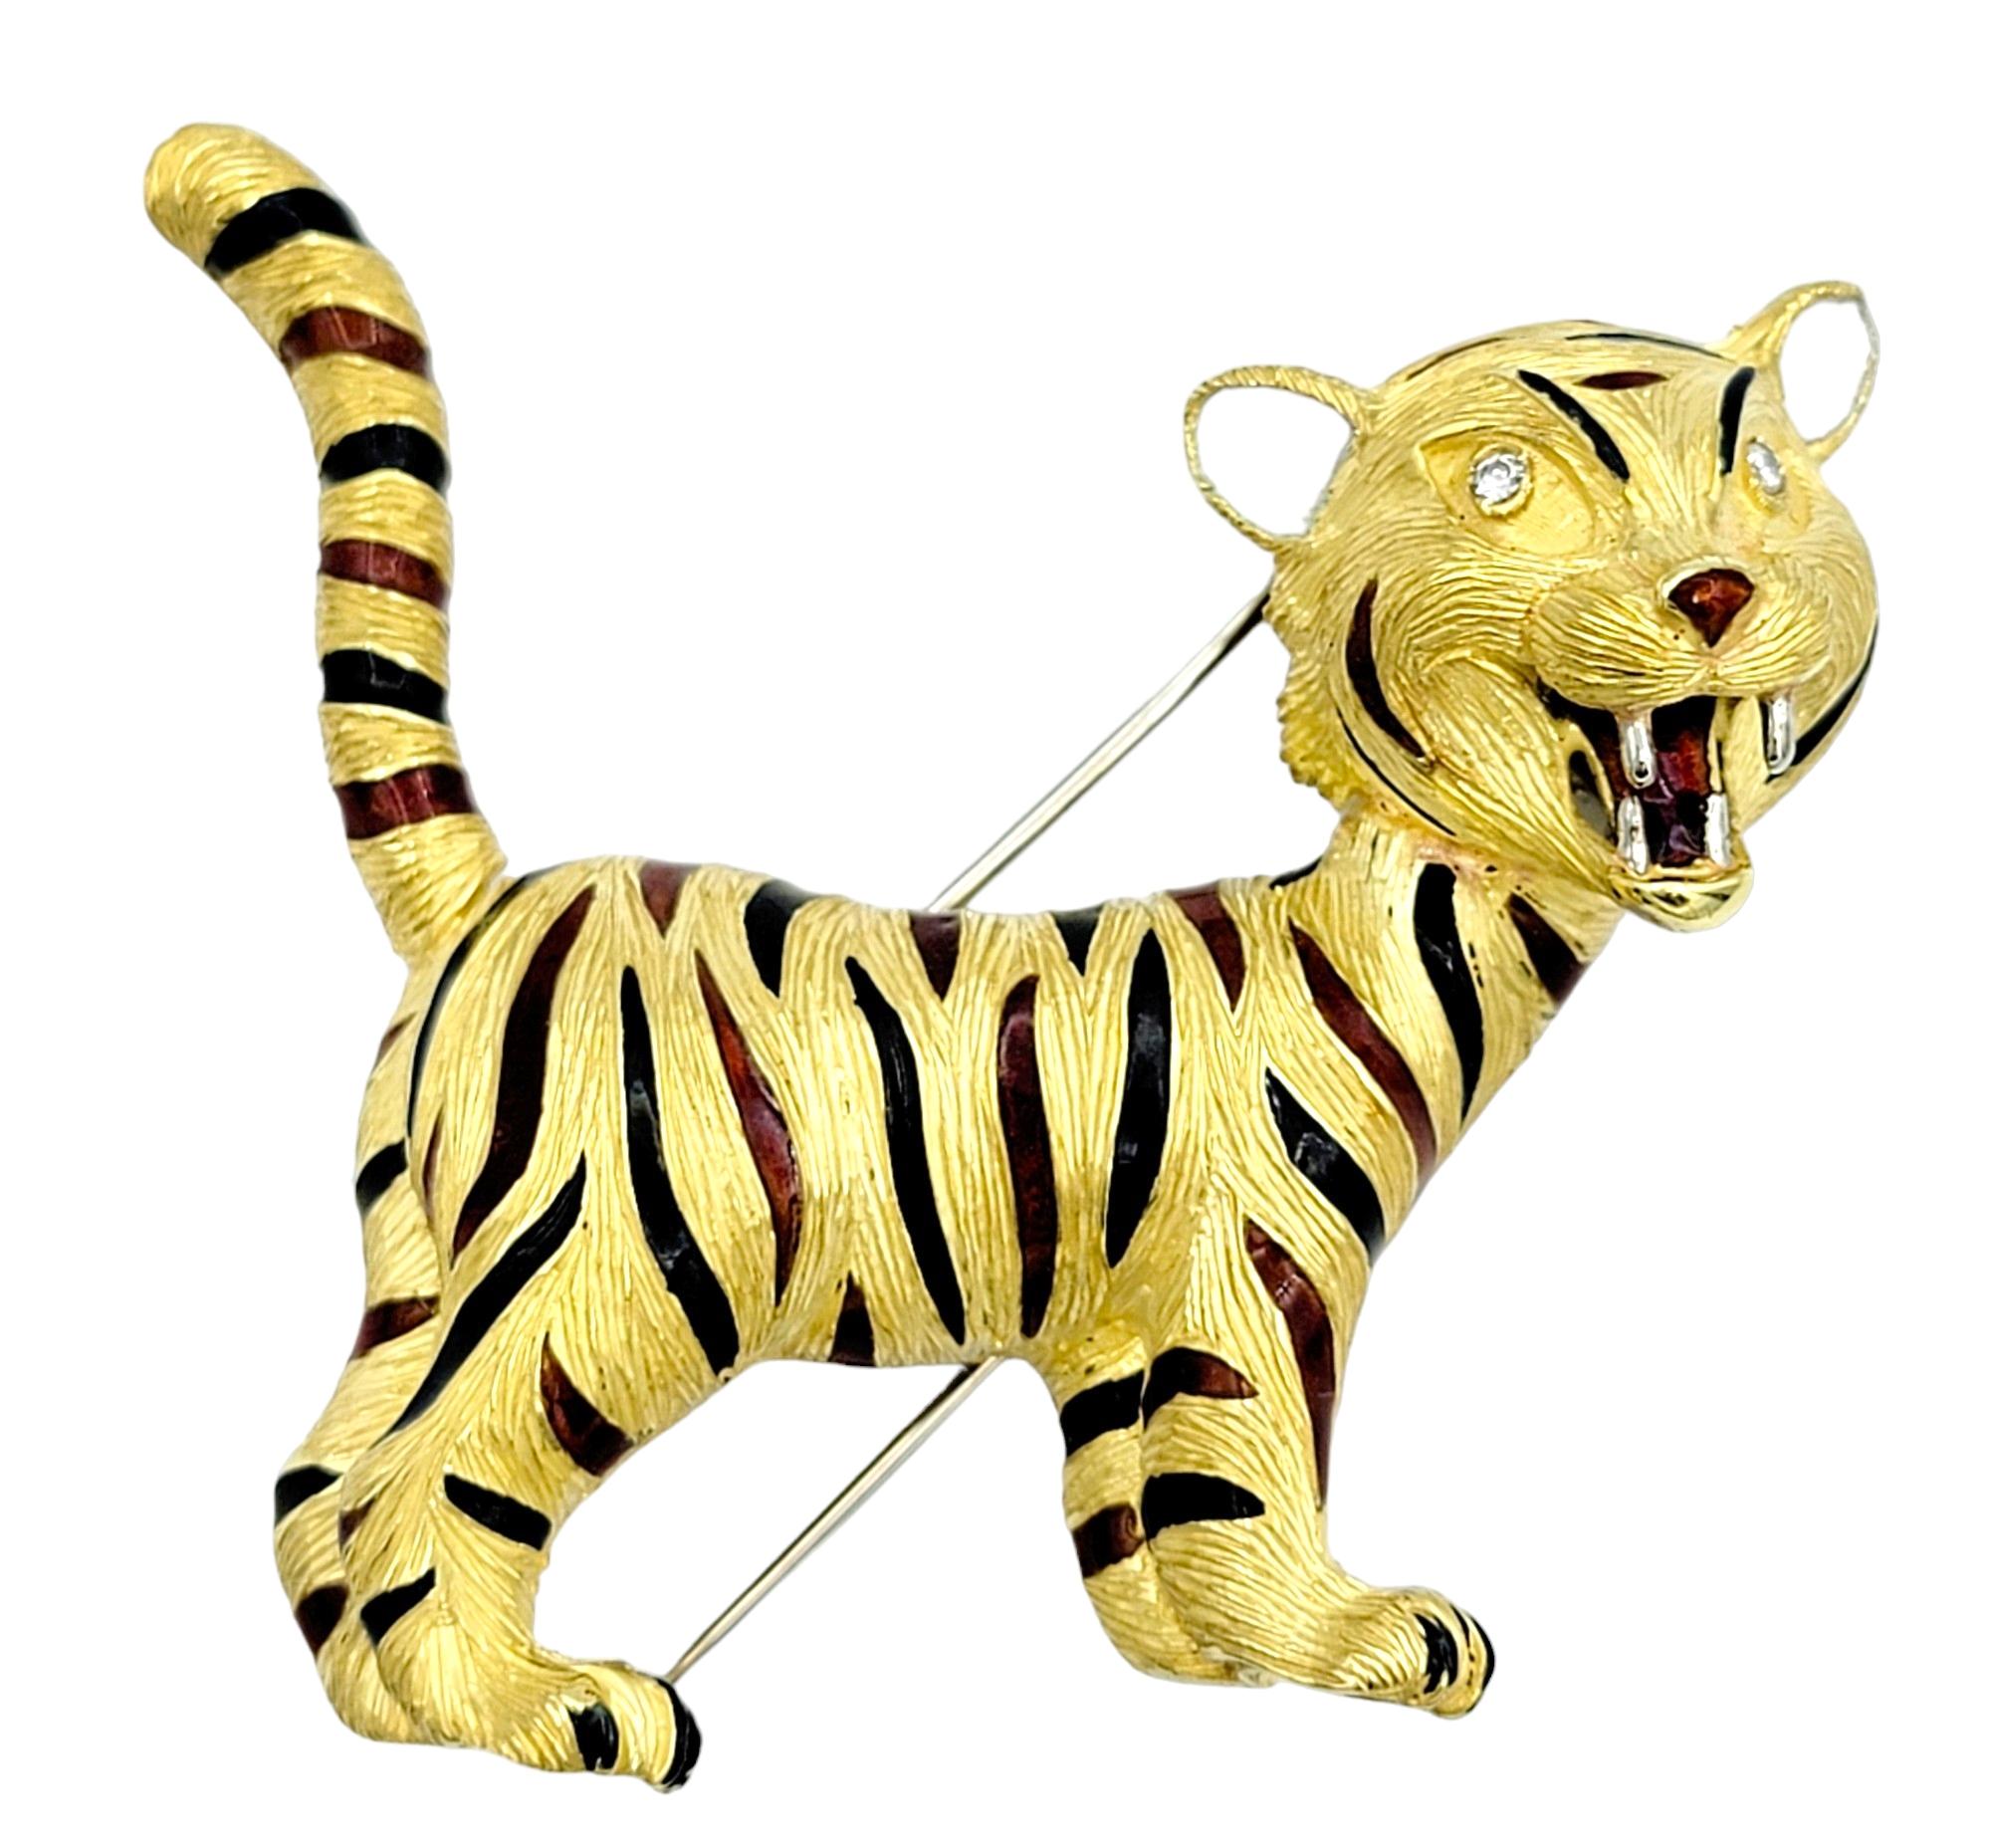 This captivating tiger brooch, expertly set in luxurious 18 karat yellow gold, is a testament to both bold design and meticulous craftsmanship. The striking depiction captures the majestic creature in a powerful stance, evoking a sense of movement